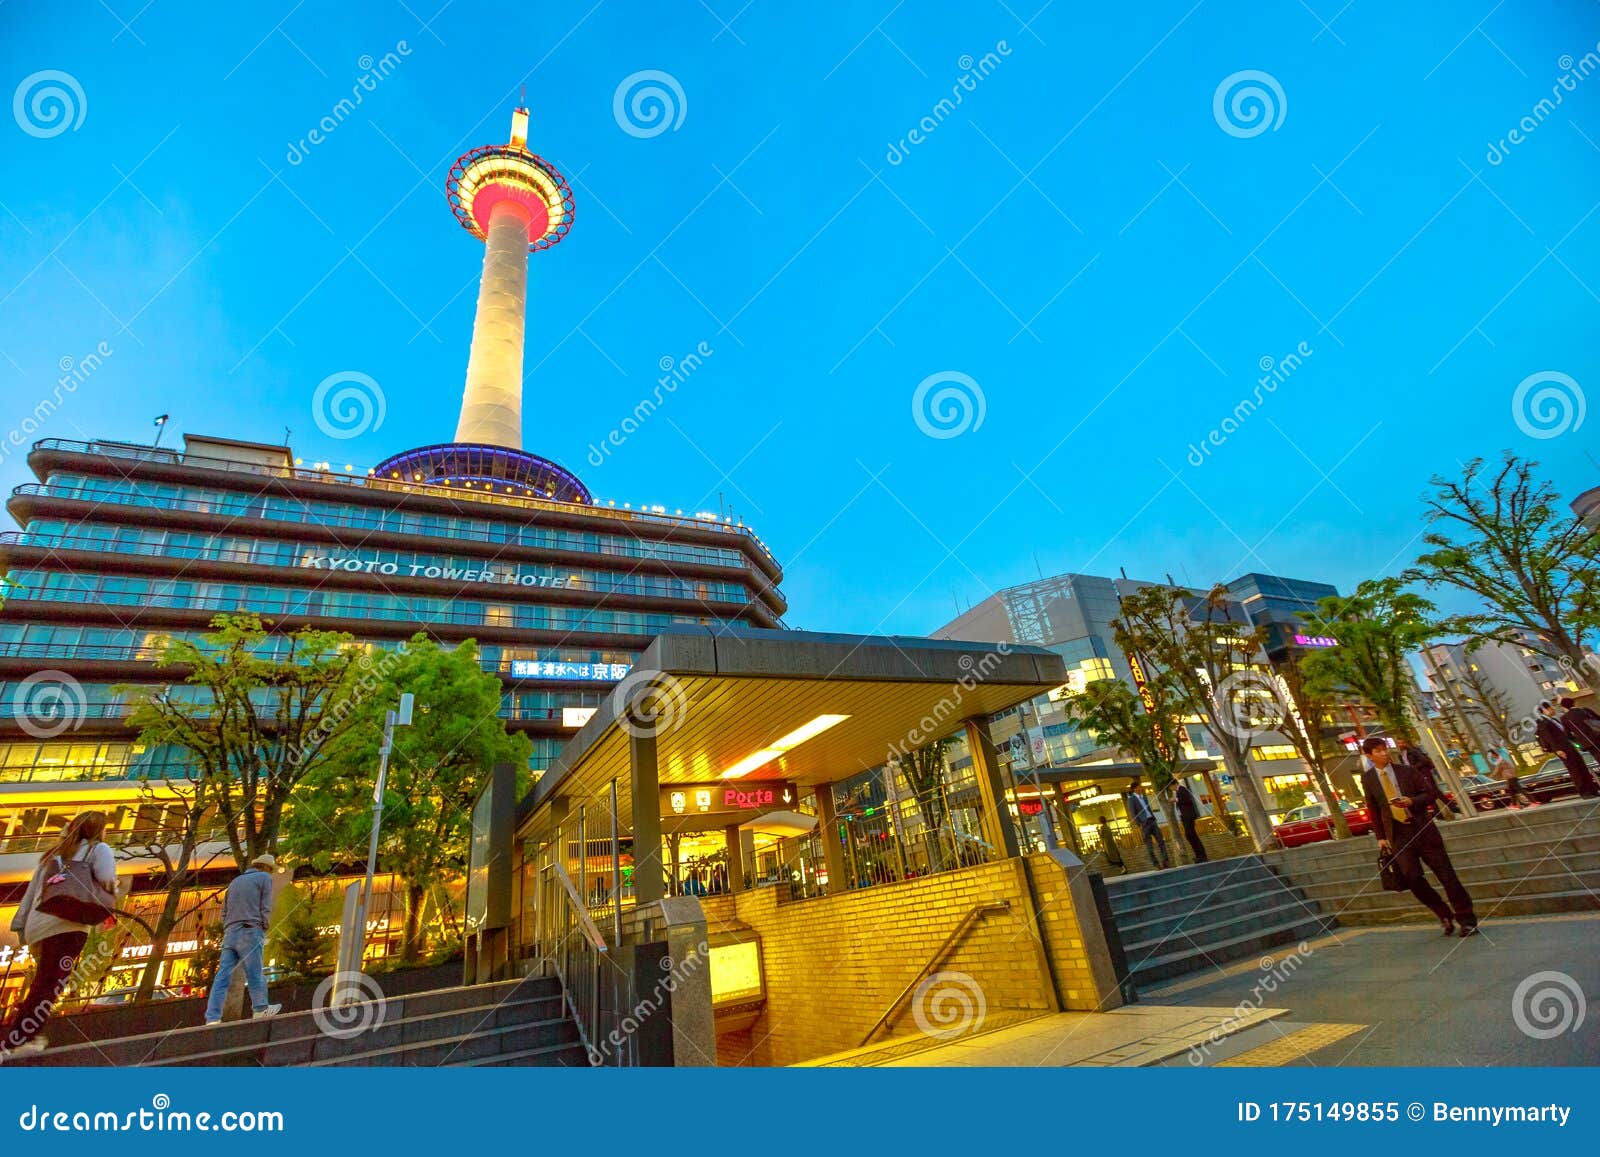 Kyoto Tower Hotel By Night Editorial Image. Image Of Lighthouse - 175149855